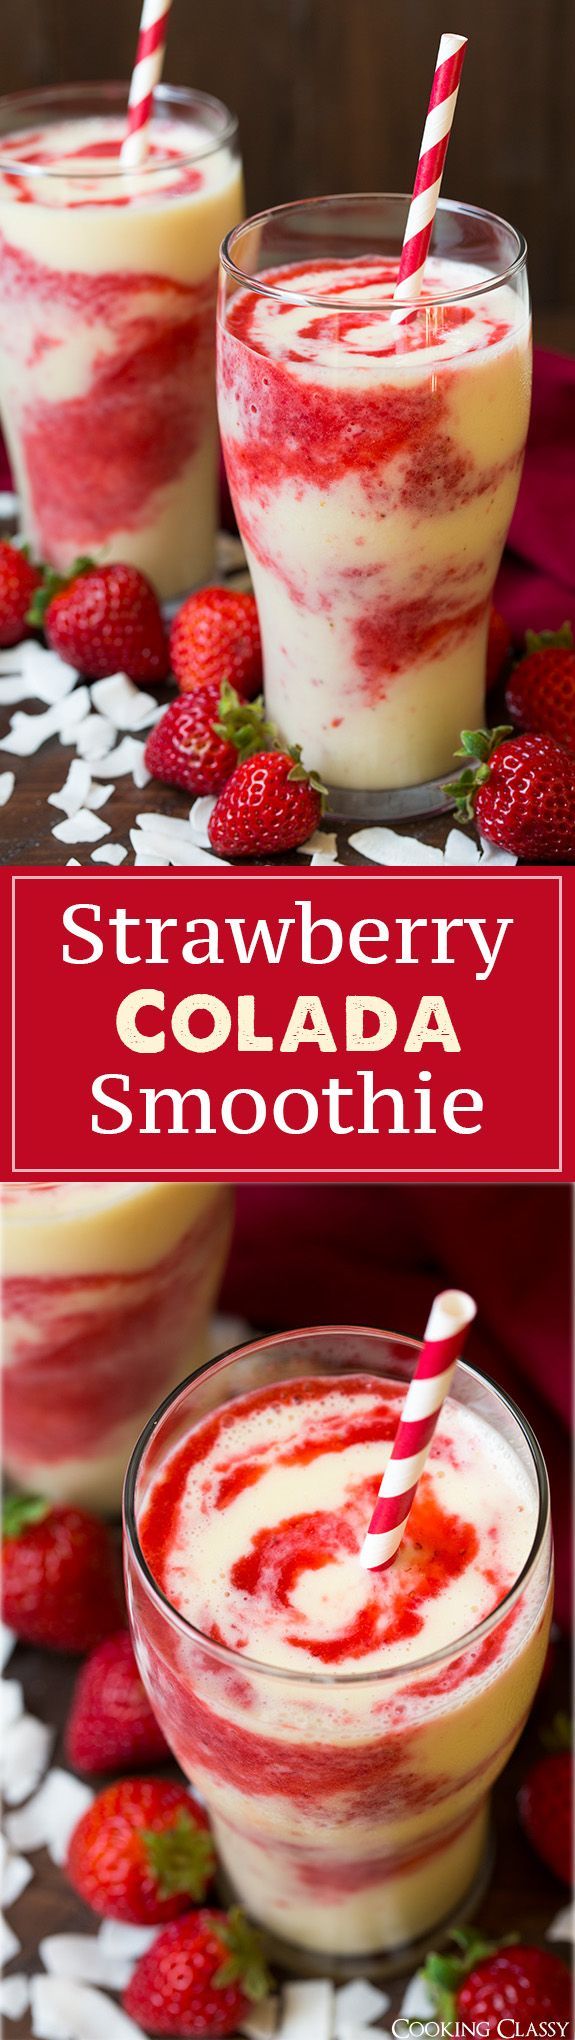 Strawberry Colada Smoothie – these are so refreshing on a hot summer day! Love the strawberry coconut